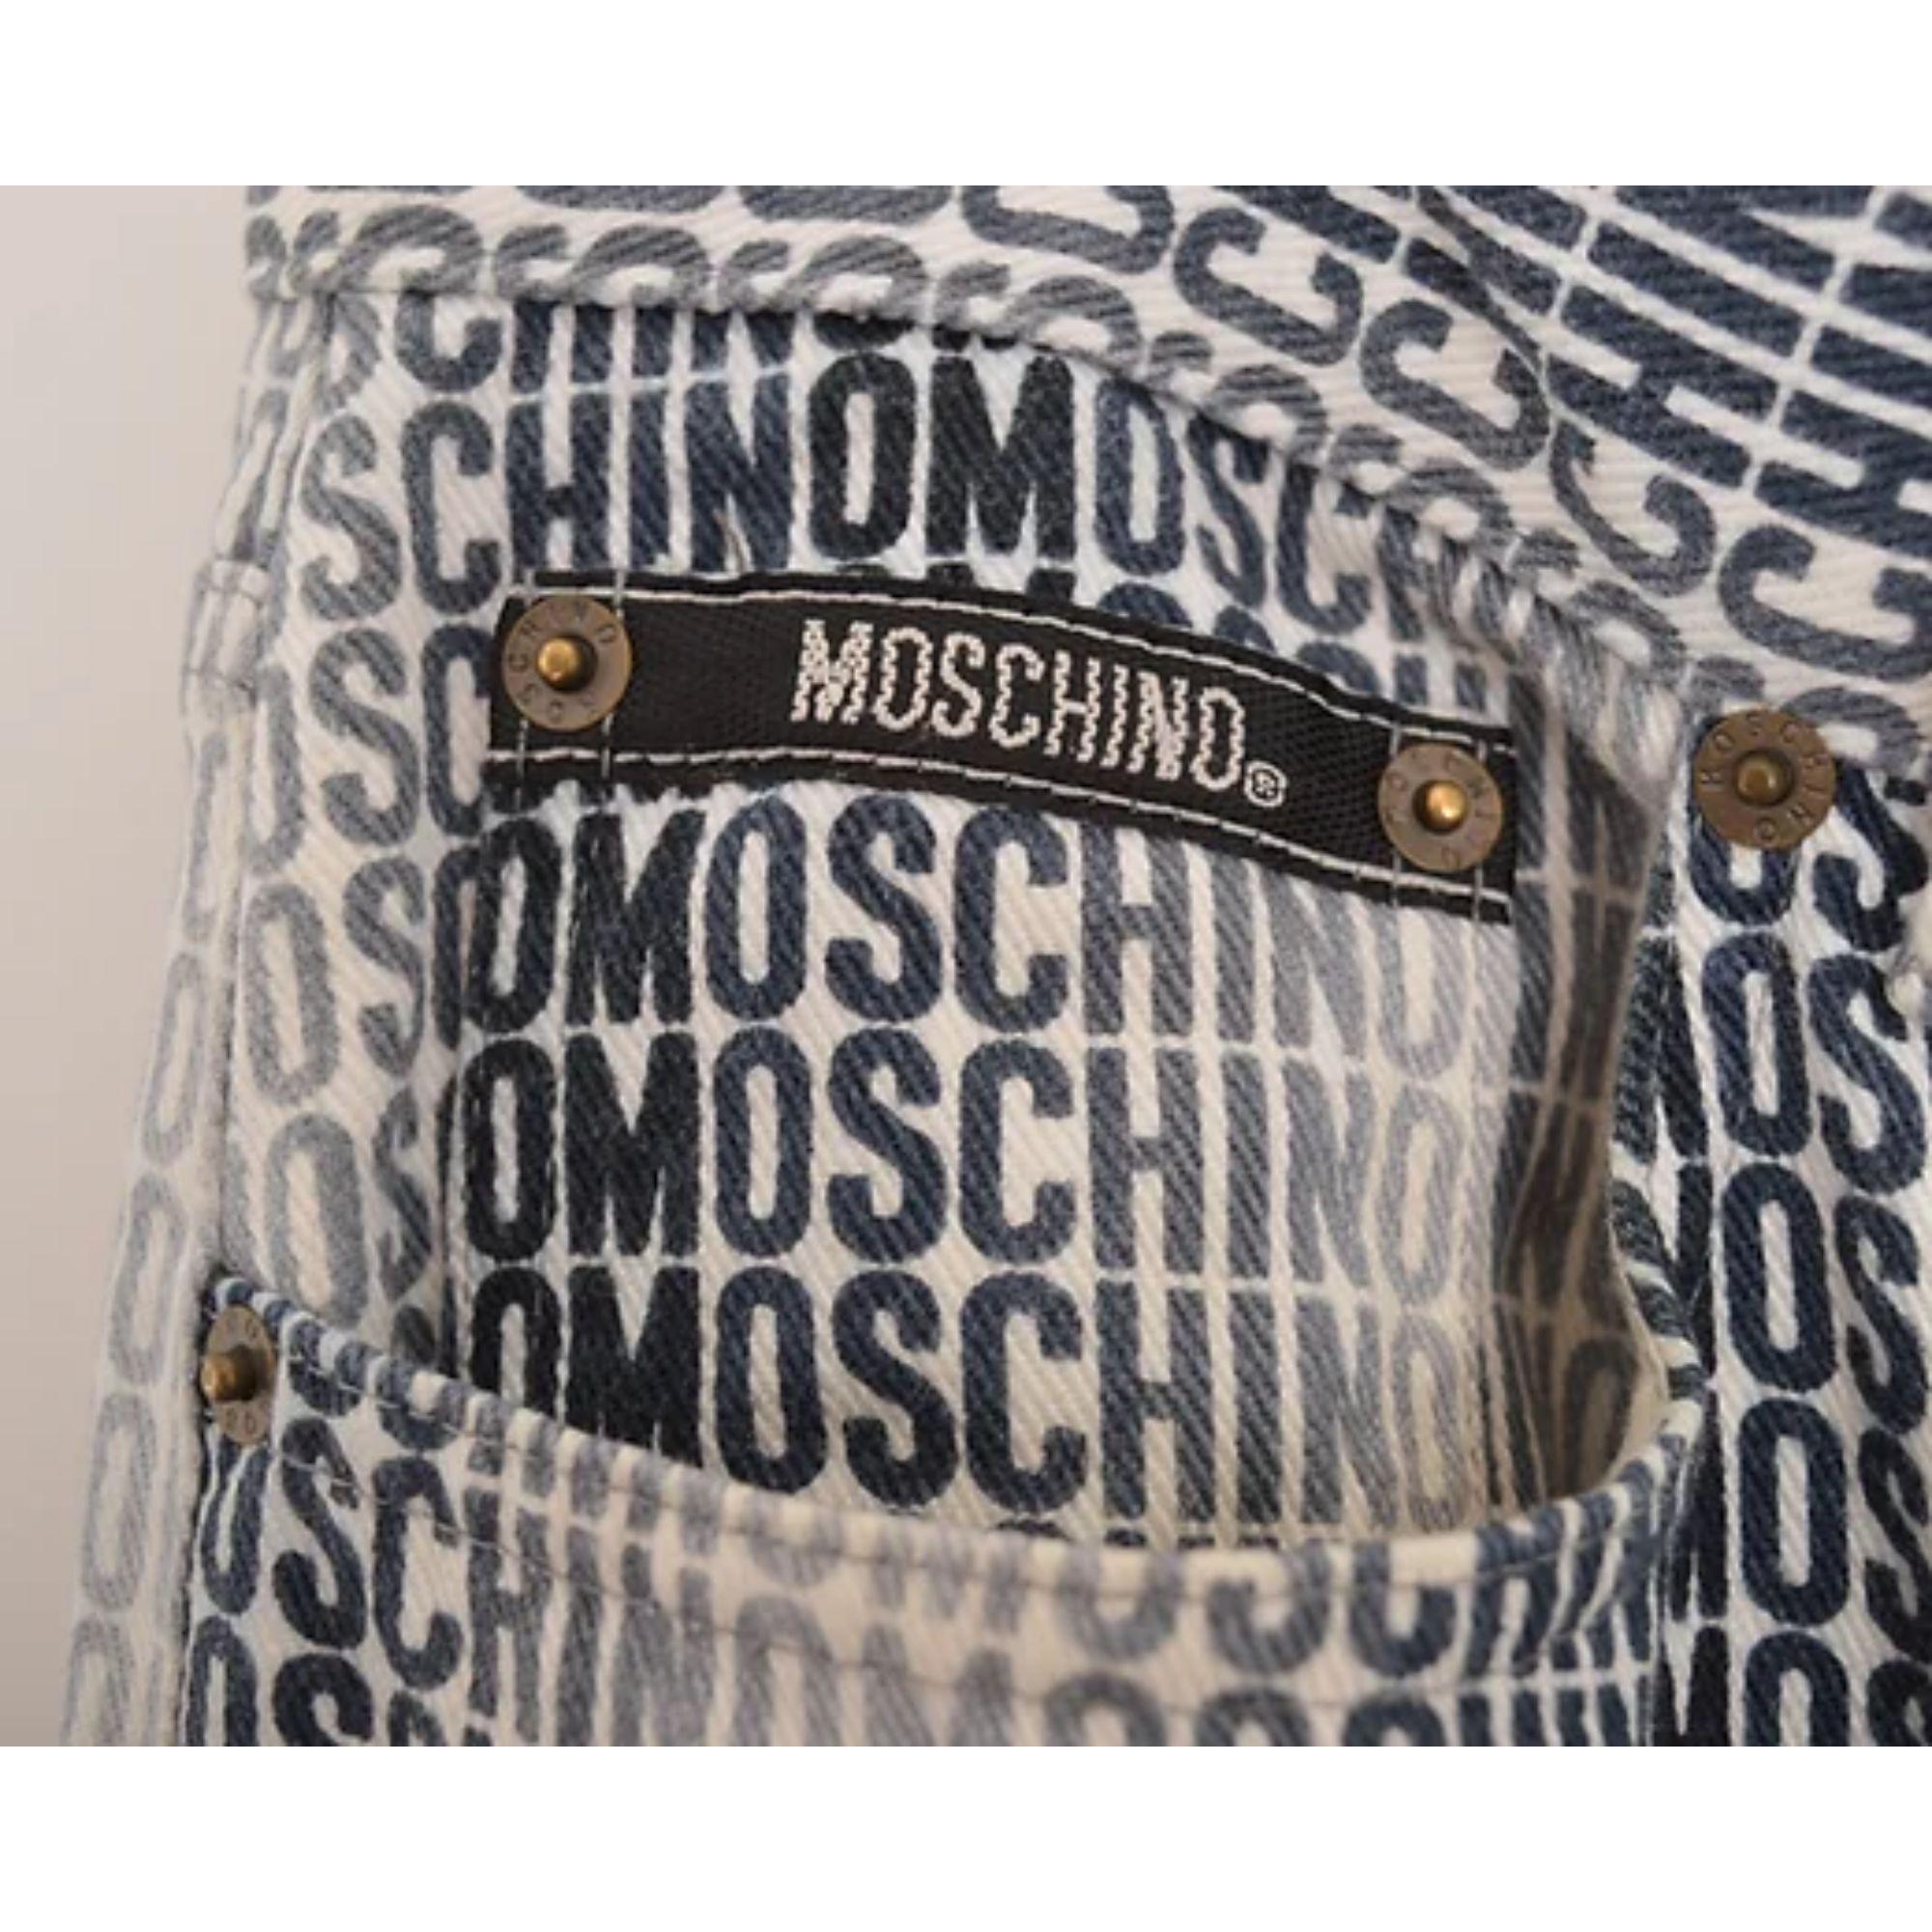 UK Garage Rave Vintage Moschino Spell Out White & Black Trousers jeans In Good Condition For Sale In Sheffield, GB